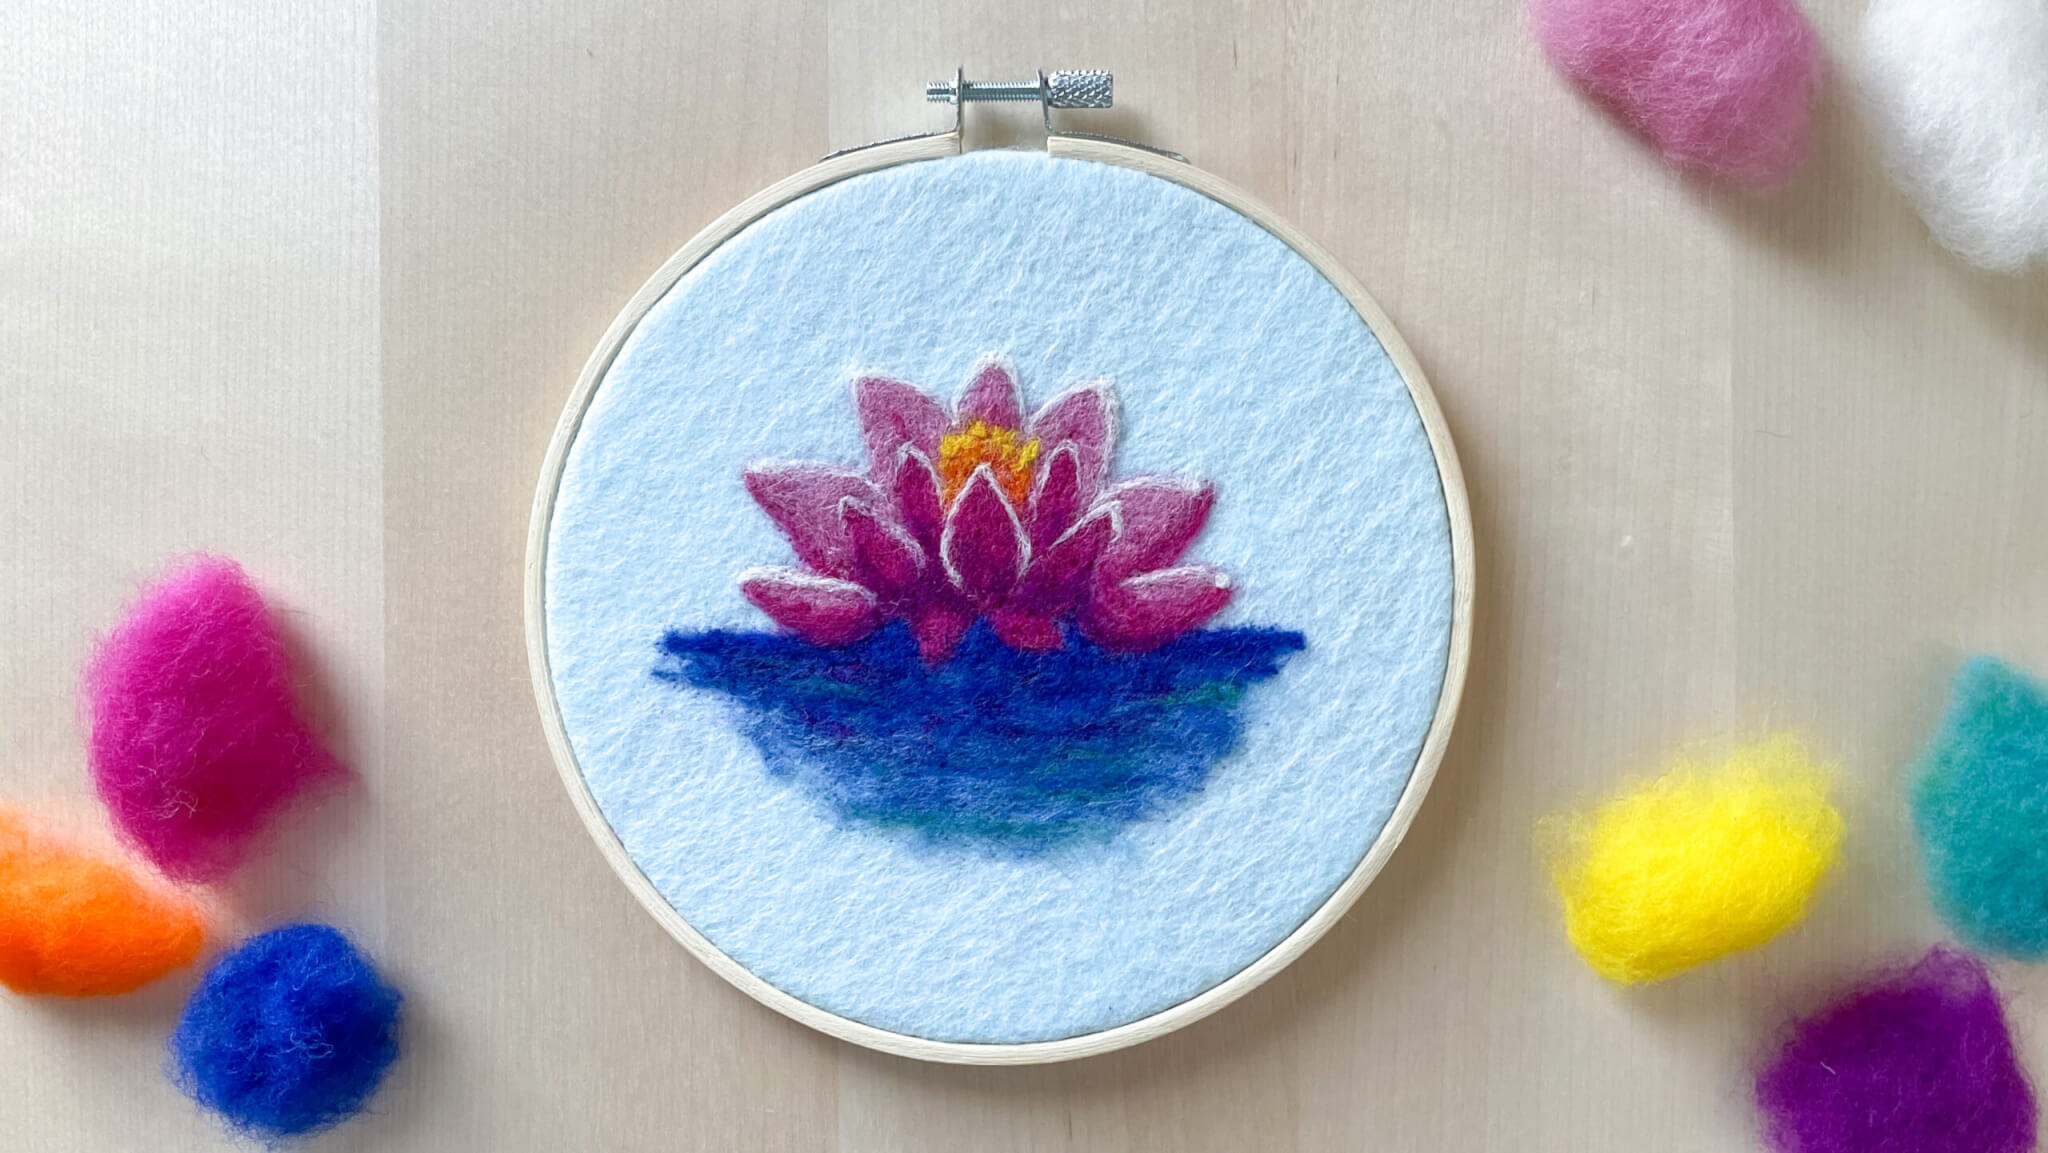 Felt design of a water lily on fabric on an embroidery hoop.